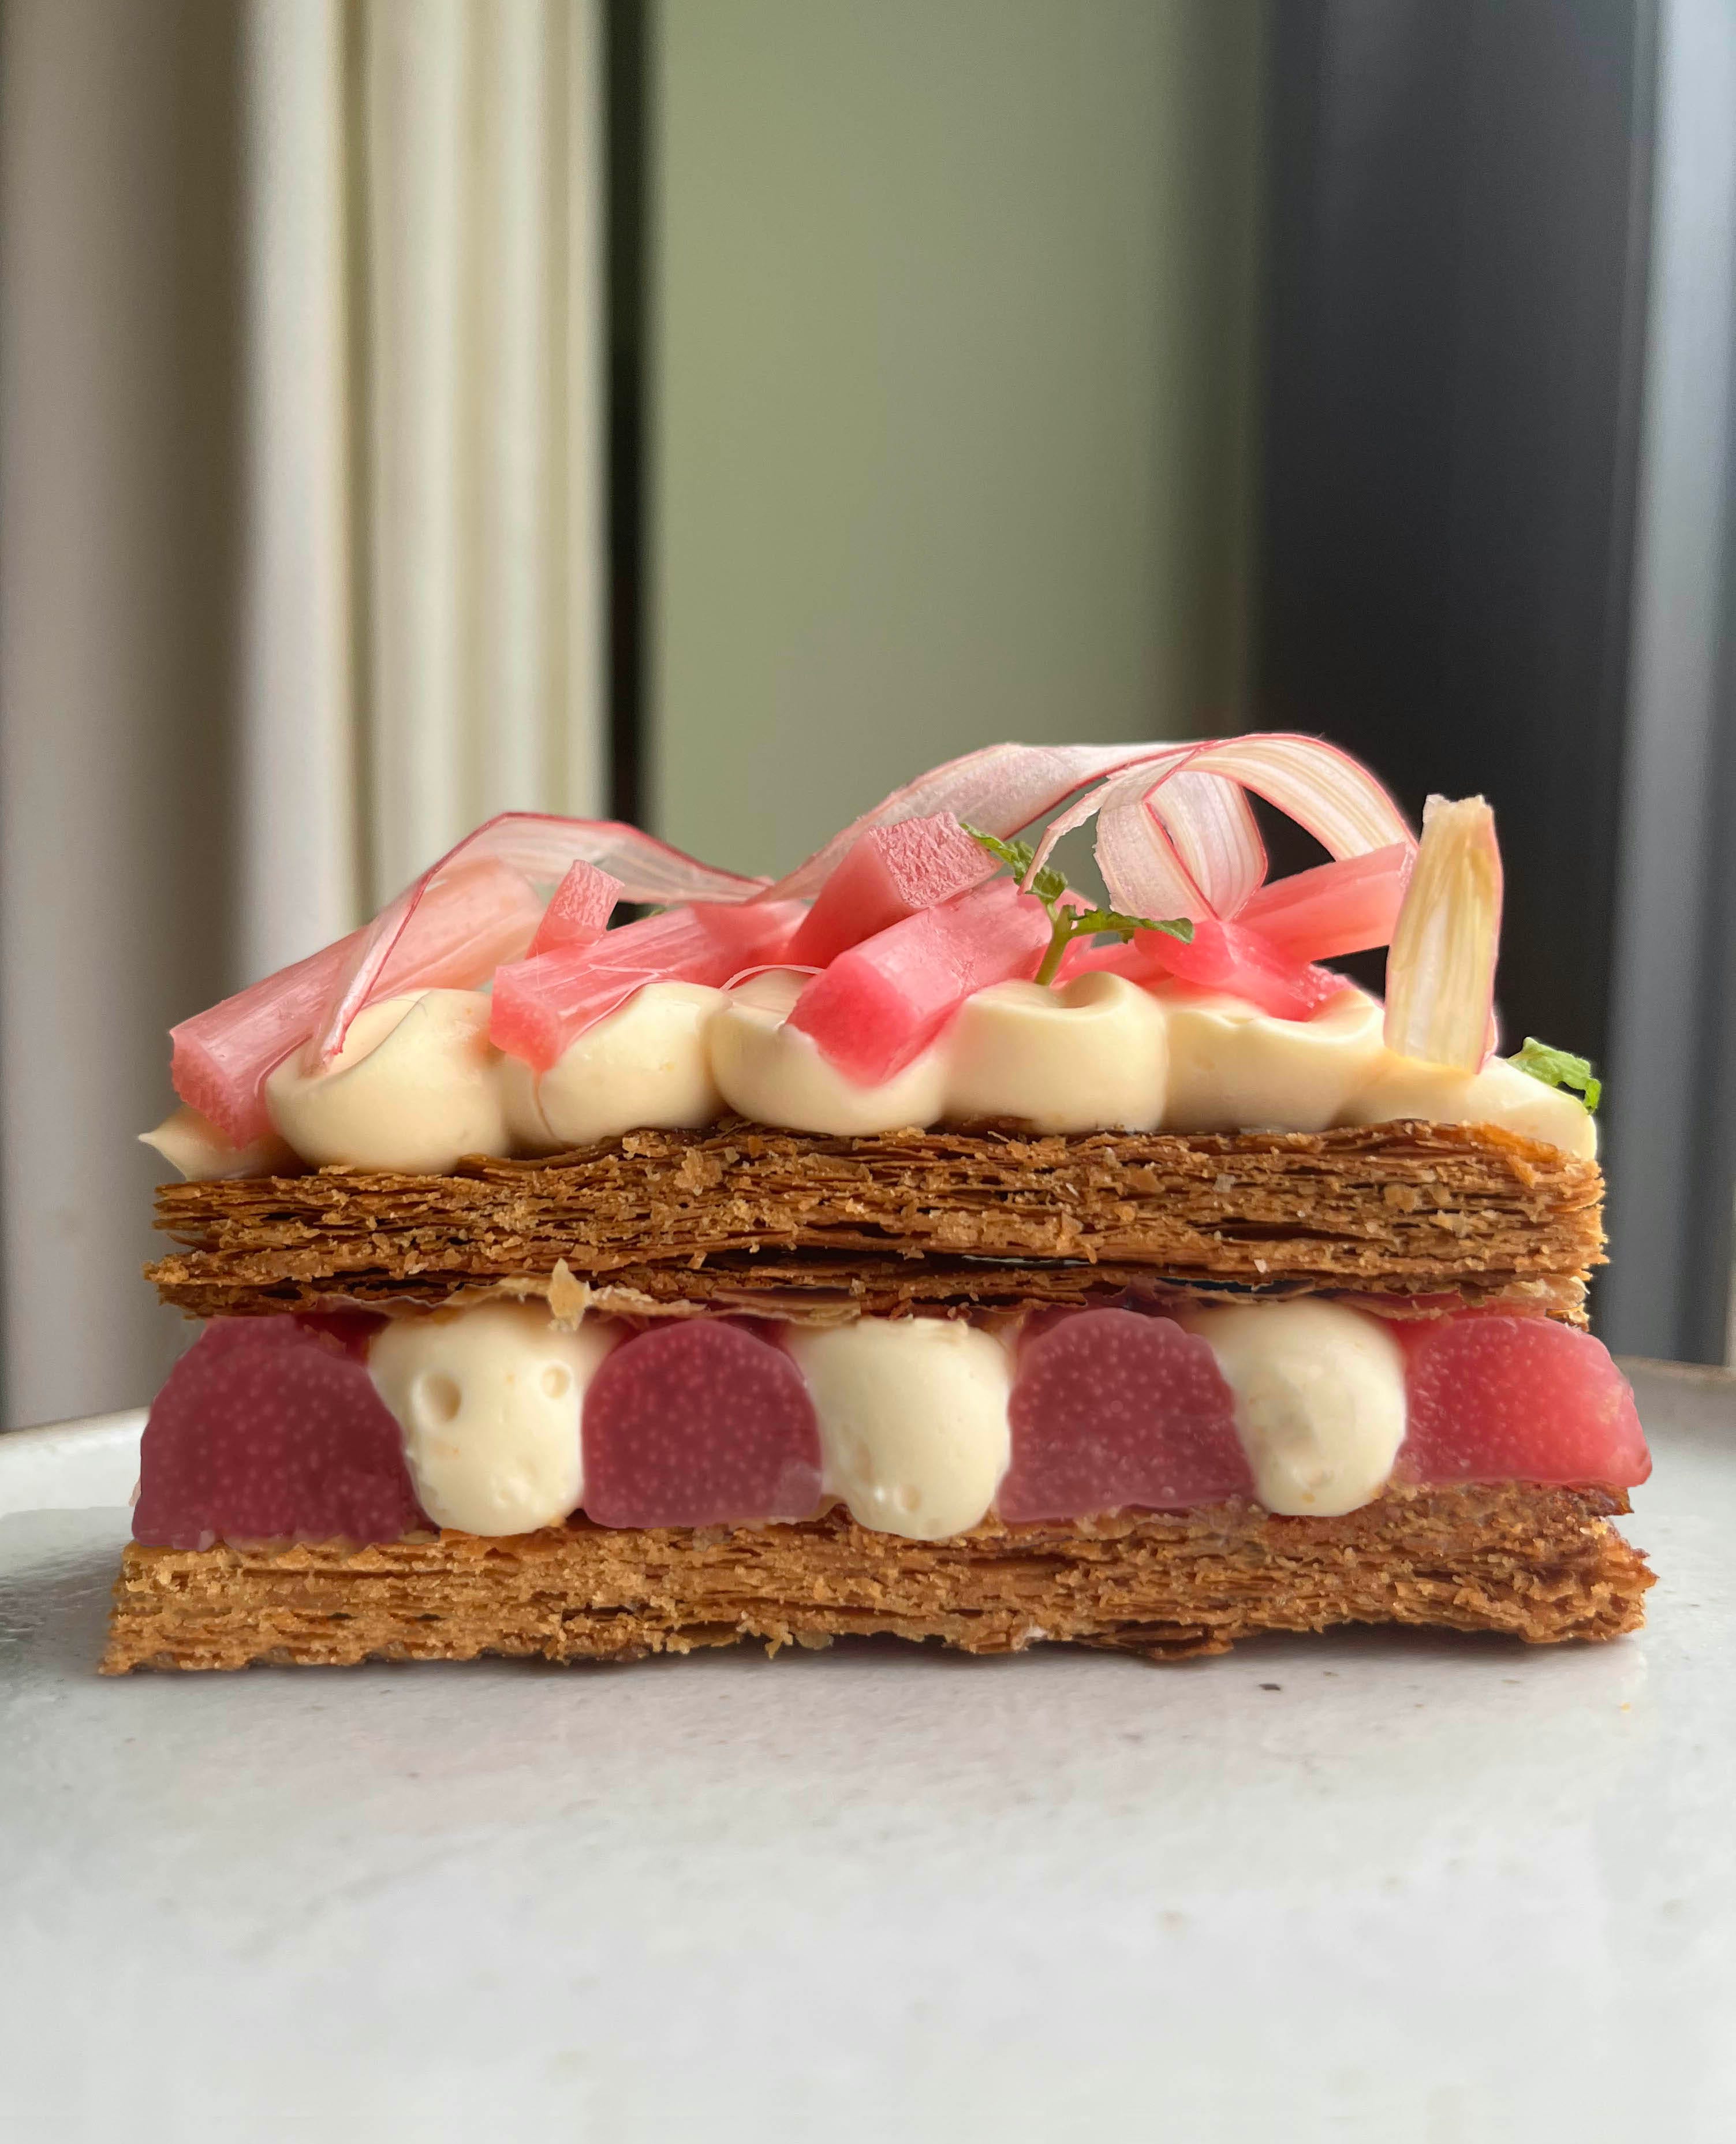 Mille-feuille is a three layers of French pastry dipped in vanilla